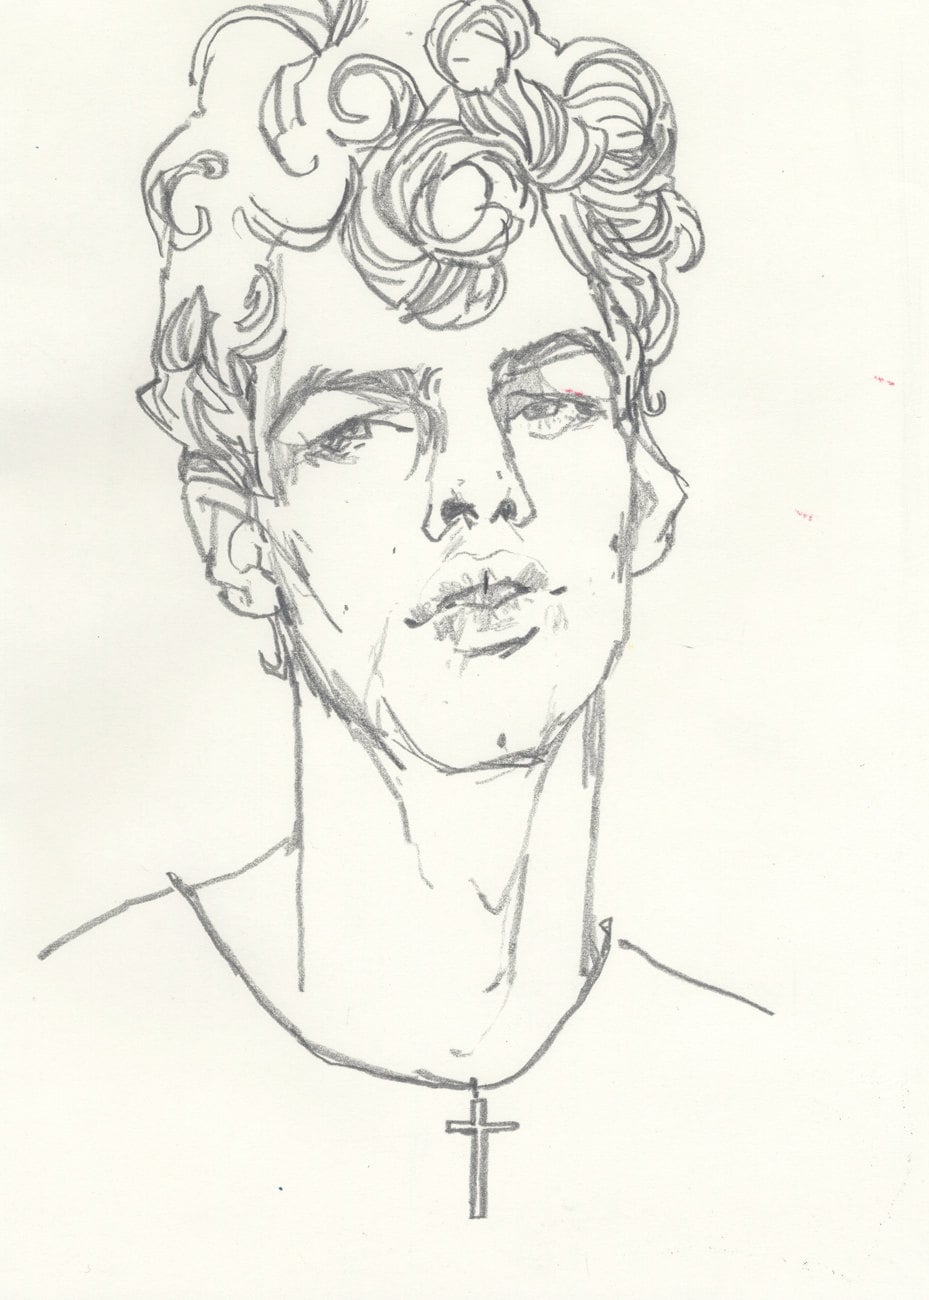 How To Draw Curly Anime Hair Boy : Curly Haired Boys by Reogun on